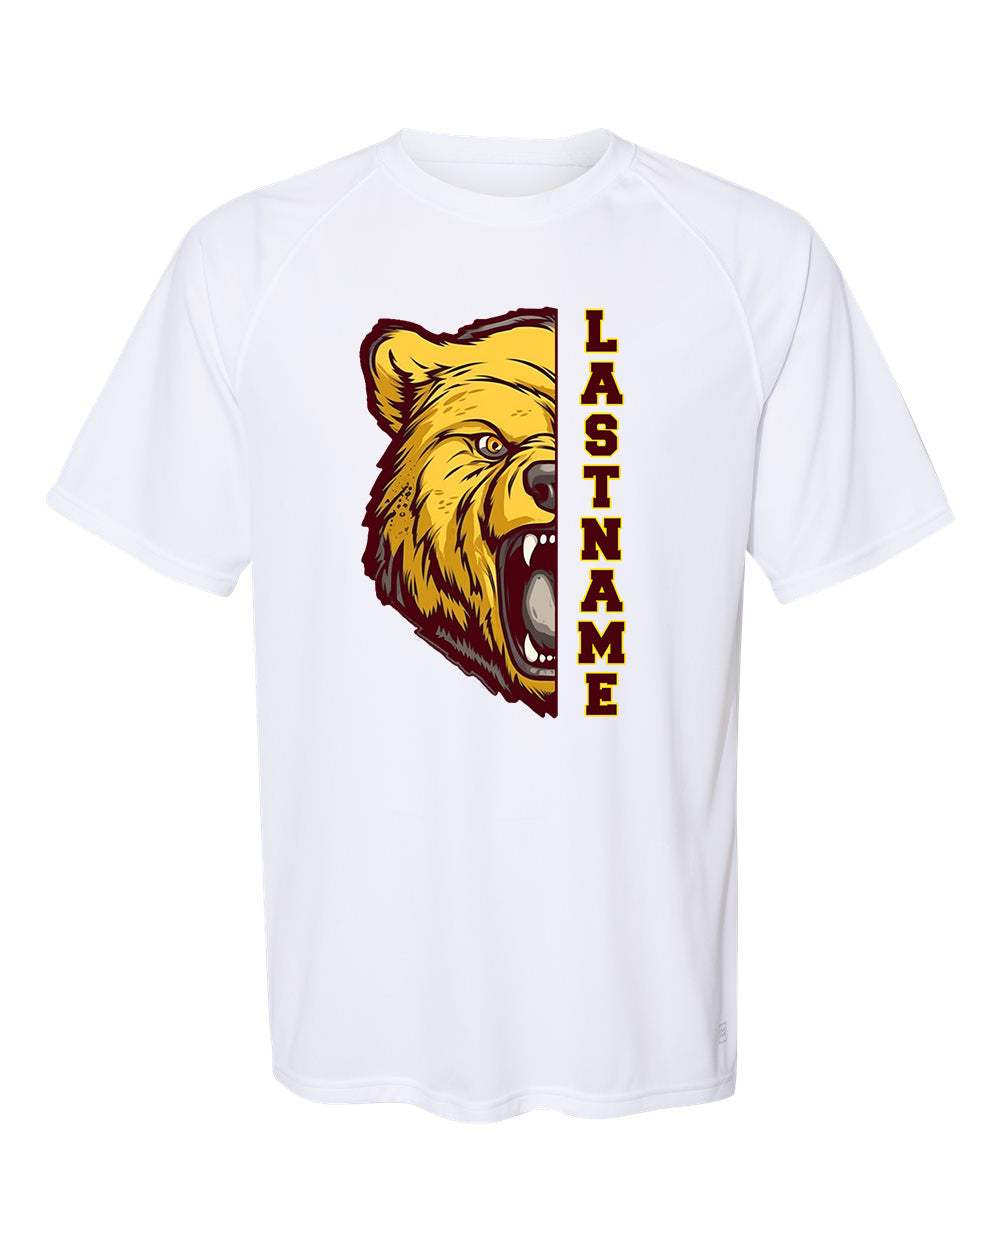 Granby Girls Soccer Custom Name Tech Shirt - 3001 (color options available)